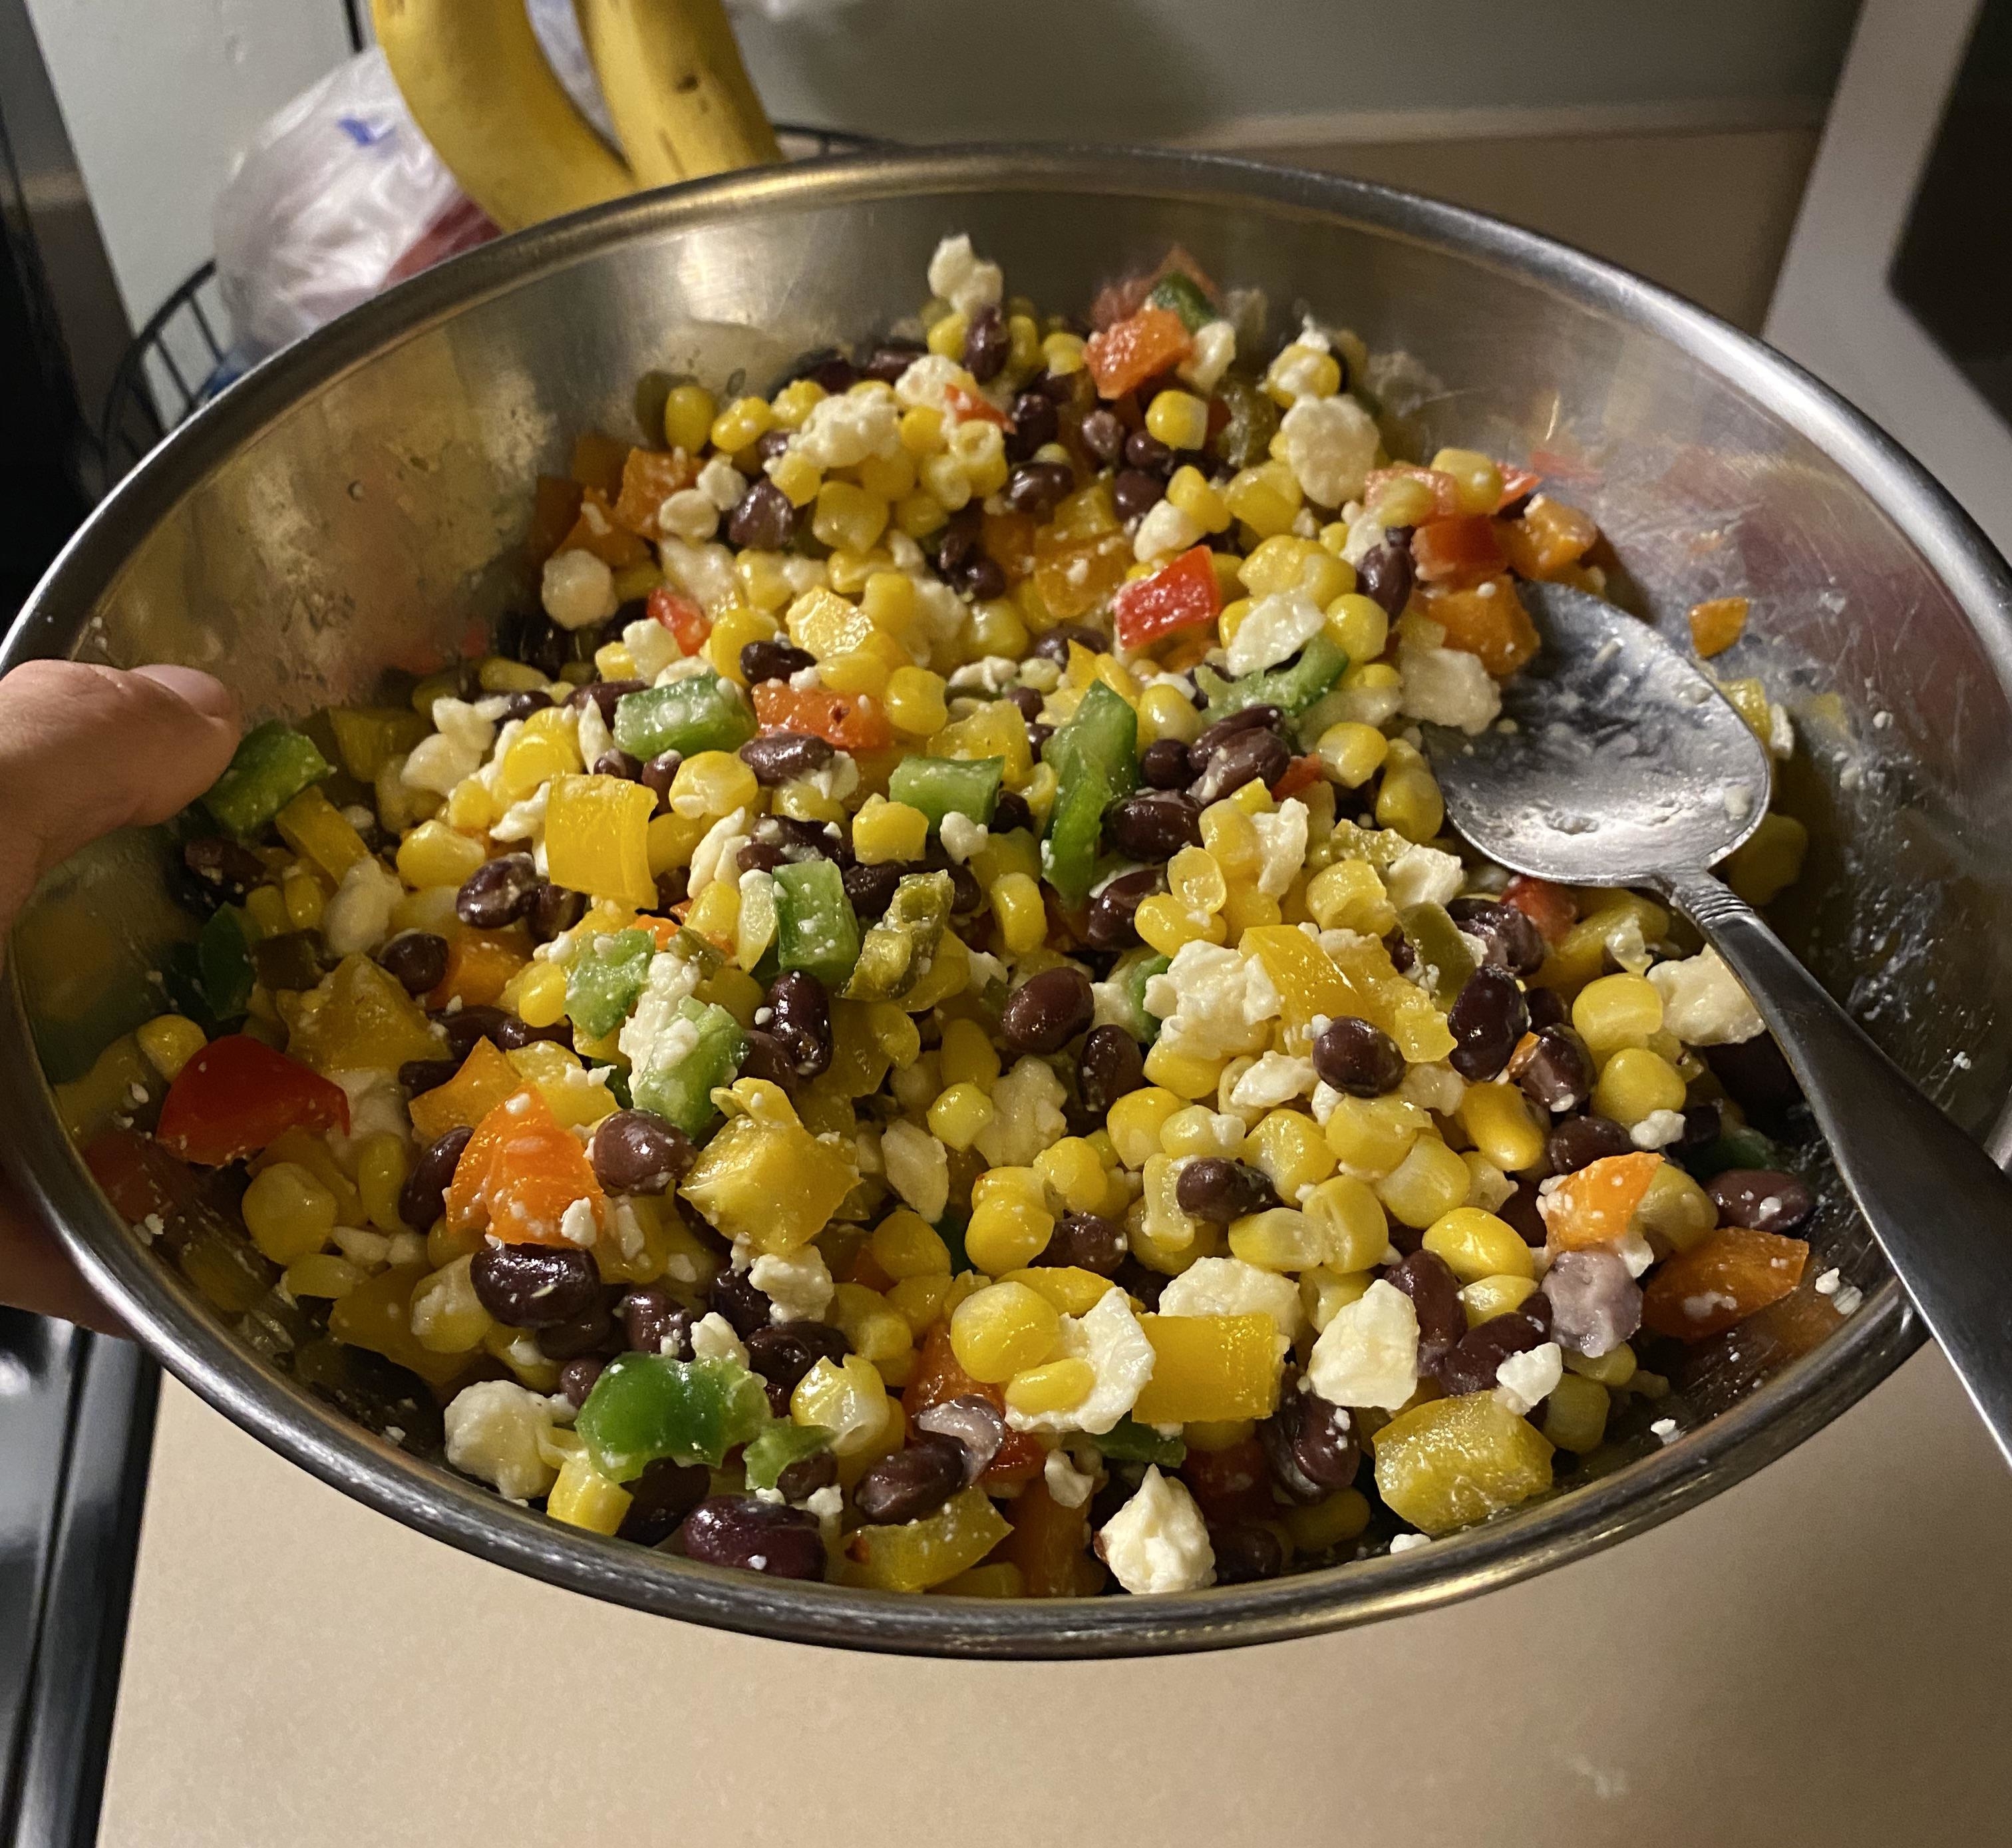 A bowl of mixed salad with various vegetables and beans, being stirred with a spoon